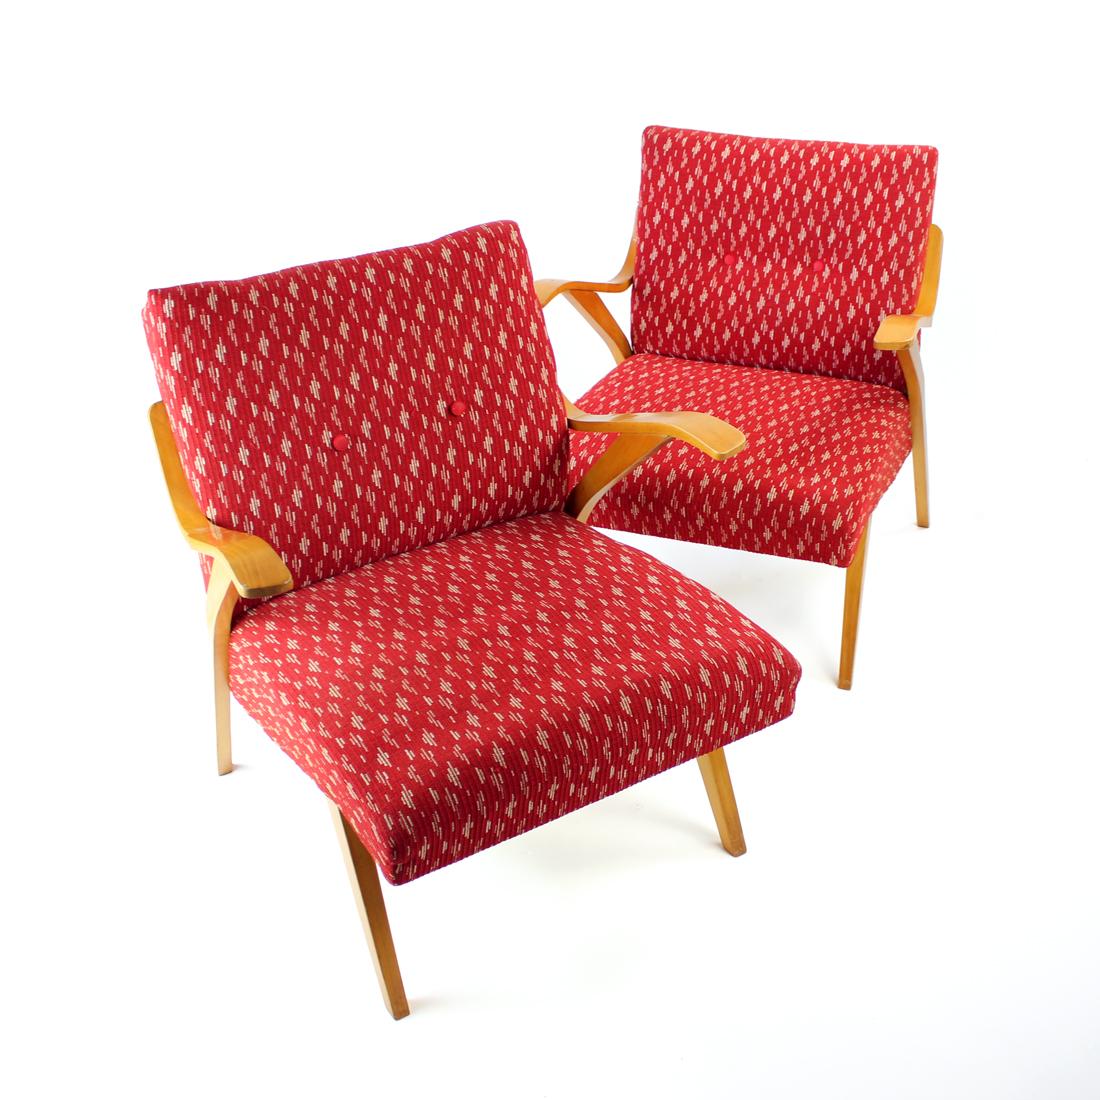 Midcentury Armchair in Original Red Fabric & Blonde Wood, Czechoslovakia, 1960s For Sale 6